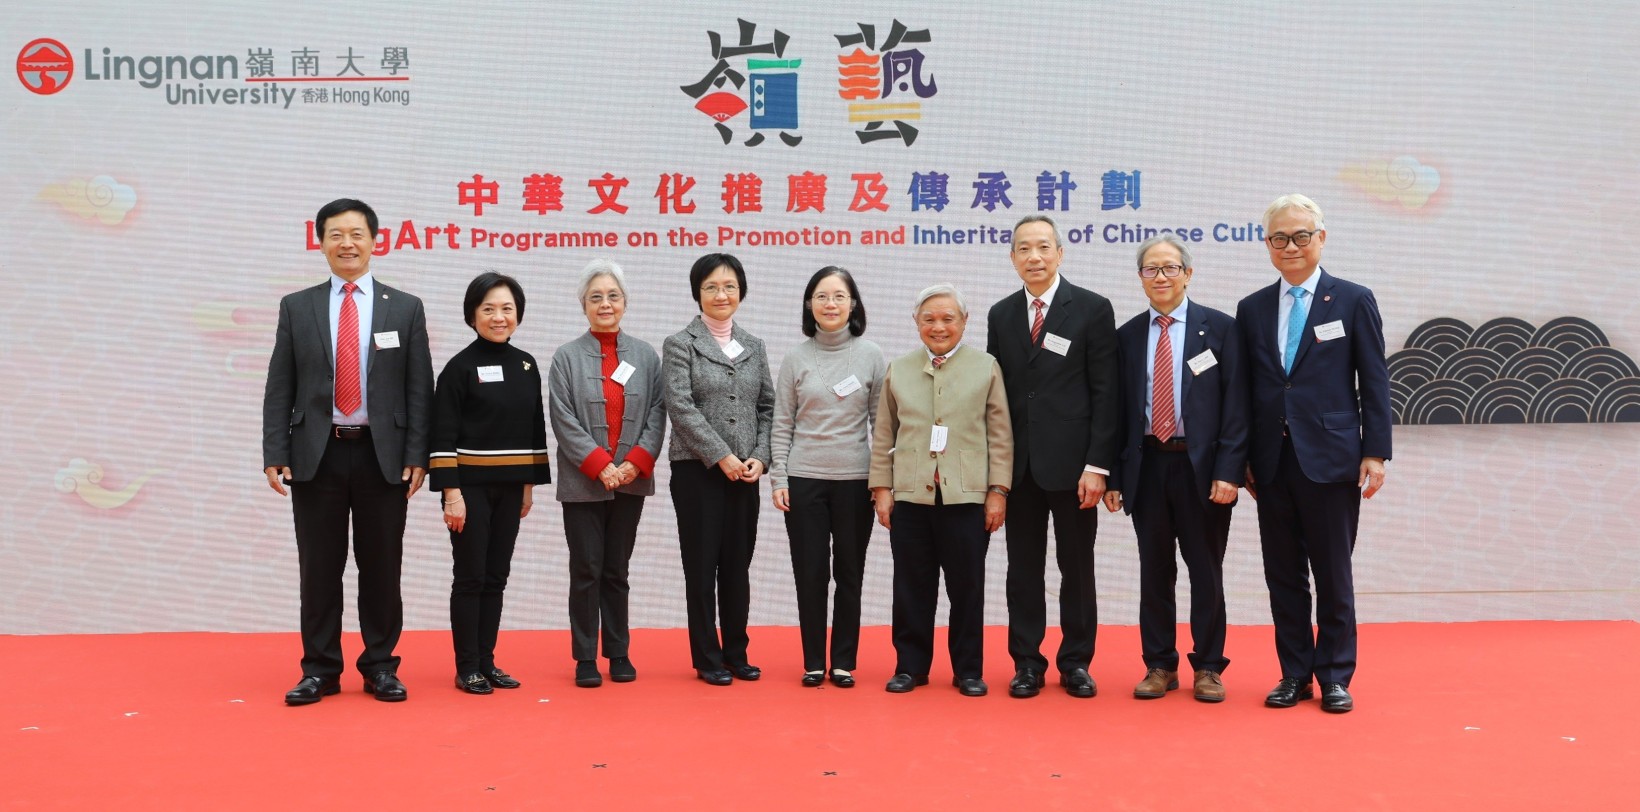 Group photo of guests at the Launch Ceremony of LingArt Programme on the Promotion & Inheritance of Chinese Culture. From Left: Prof S. Joe Qin, President of Lingnan University; Ms Sophia Wong Wai-yee, Ms Shirley Wong Shun-yee, Ms Clare Wong Yuk-yee, and Ms Carol Wong Chiu-yee, representatives of the Wong Hoo Chuen Charitable Foundation; Dr Peter Wong Pak-heung of the Board of Director of the Lingnan Education Organization; Mr Augustine Lui Ngok-che, Chairman of the Lingnan Education Organization; Mr Barry Law Lam-wai, Chairman of the Lingnan Education Organization Limited Donation Management Committee; and Dr Patrick Wong Chi-kwong, Chairman of the Court of Lingnan University.